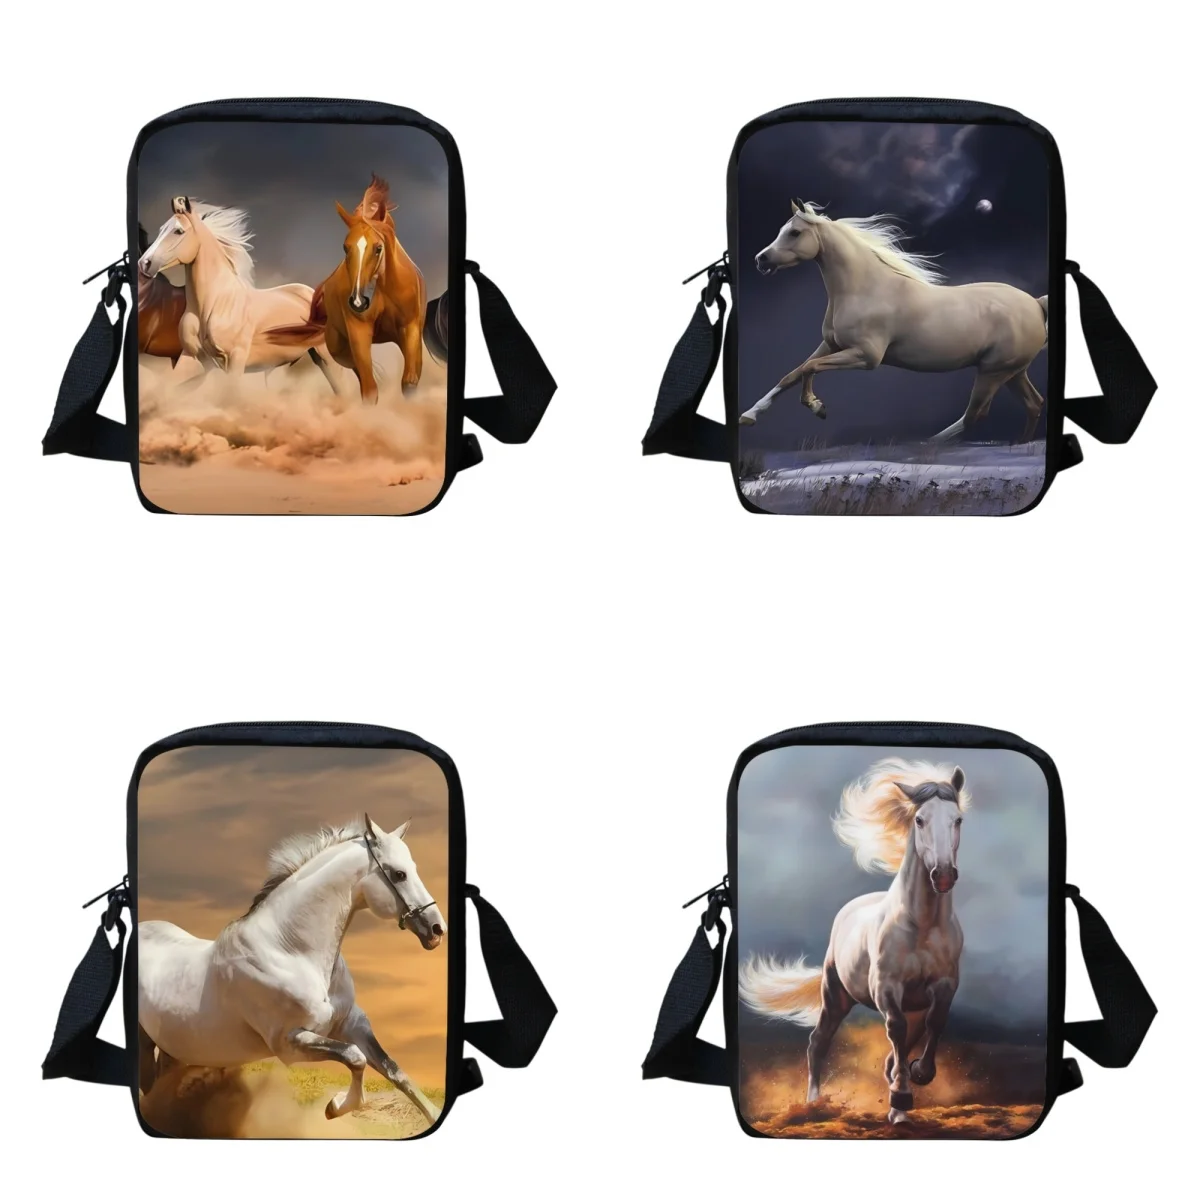 

3D Cool Animal Wild Horse Shoulder Bags for Children Crossbody Bags Female Fashion Teenagers Practical Schoolbags Travelbag New